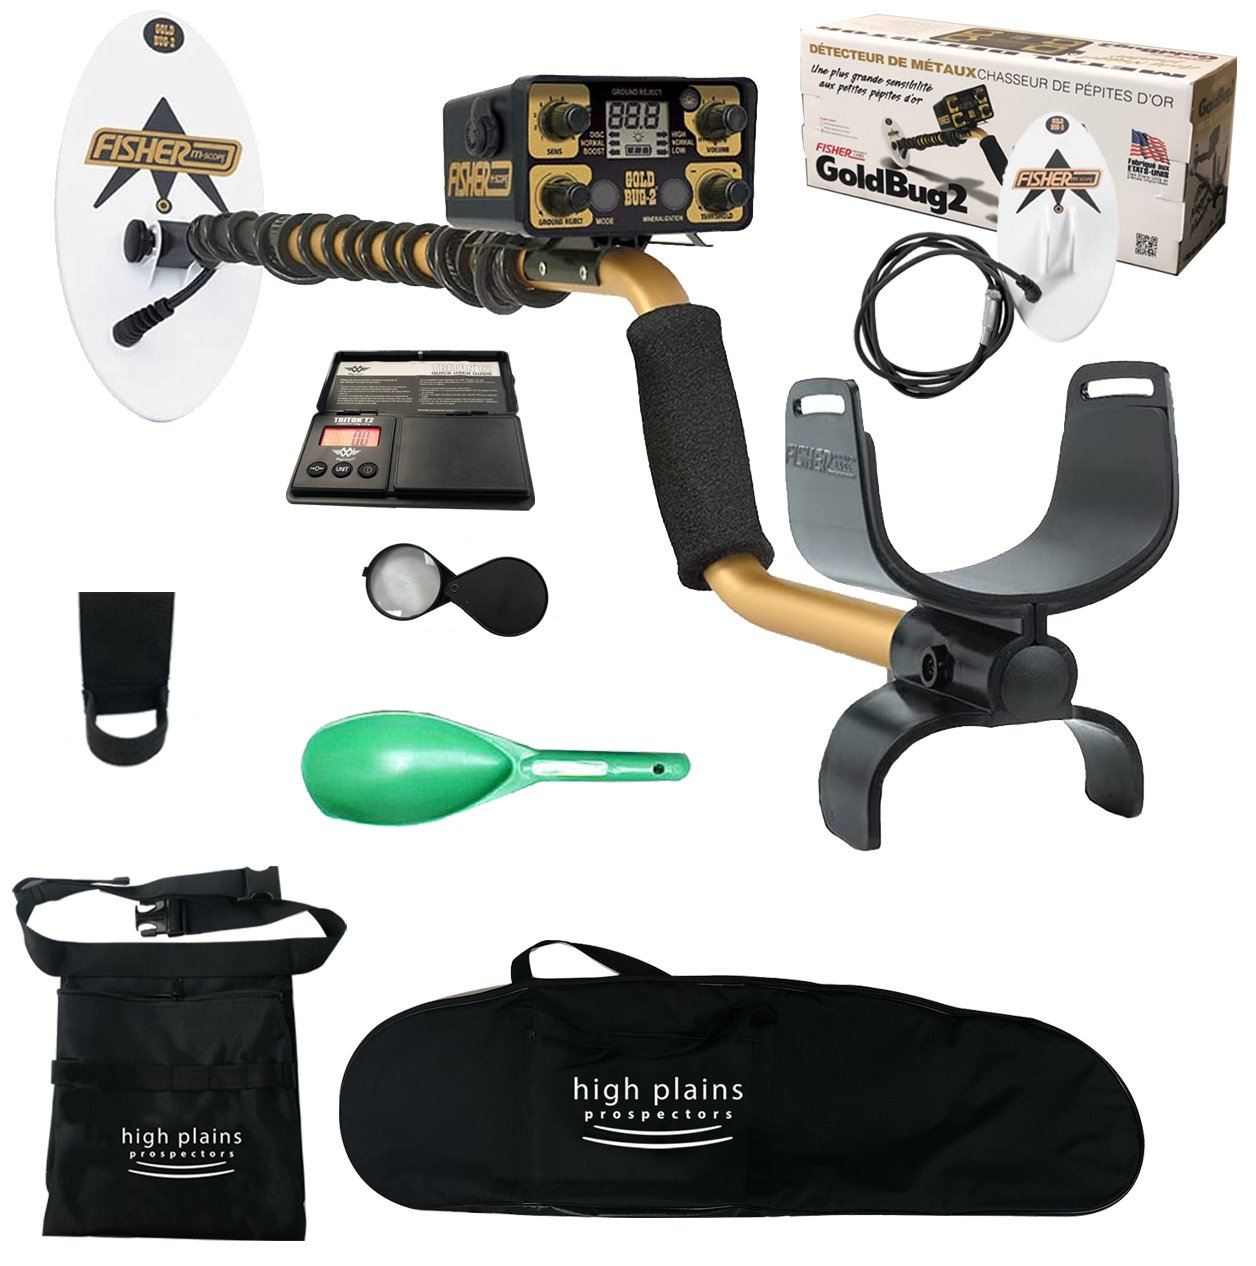 Fisher Gold bug 2 gold metal detector with free gear